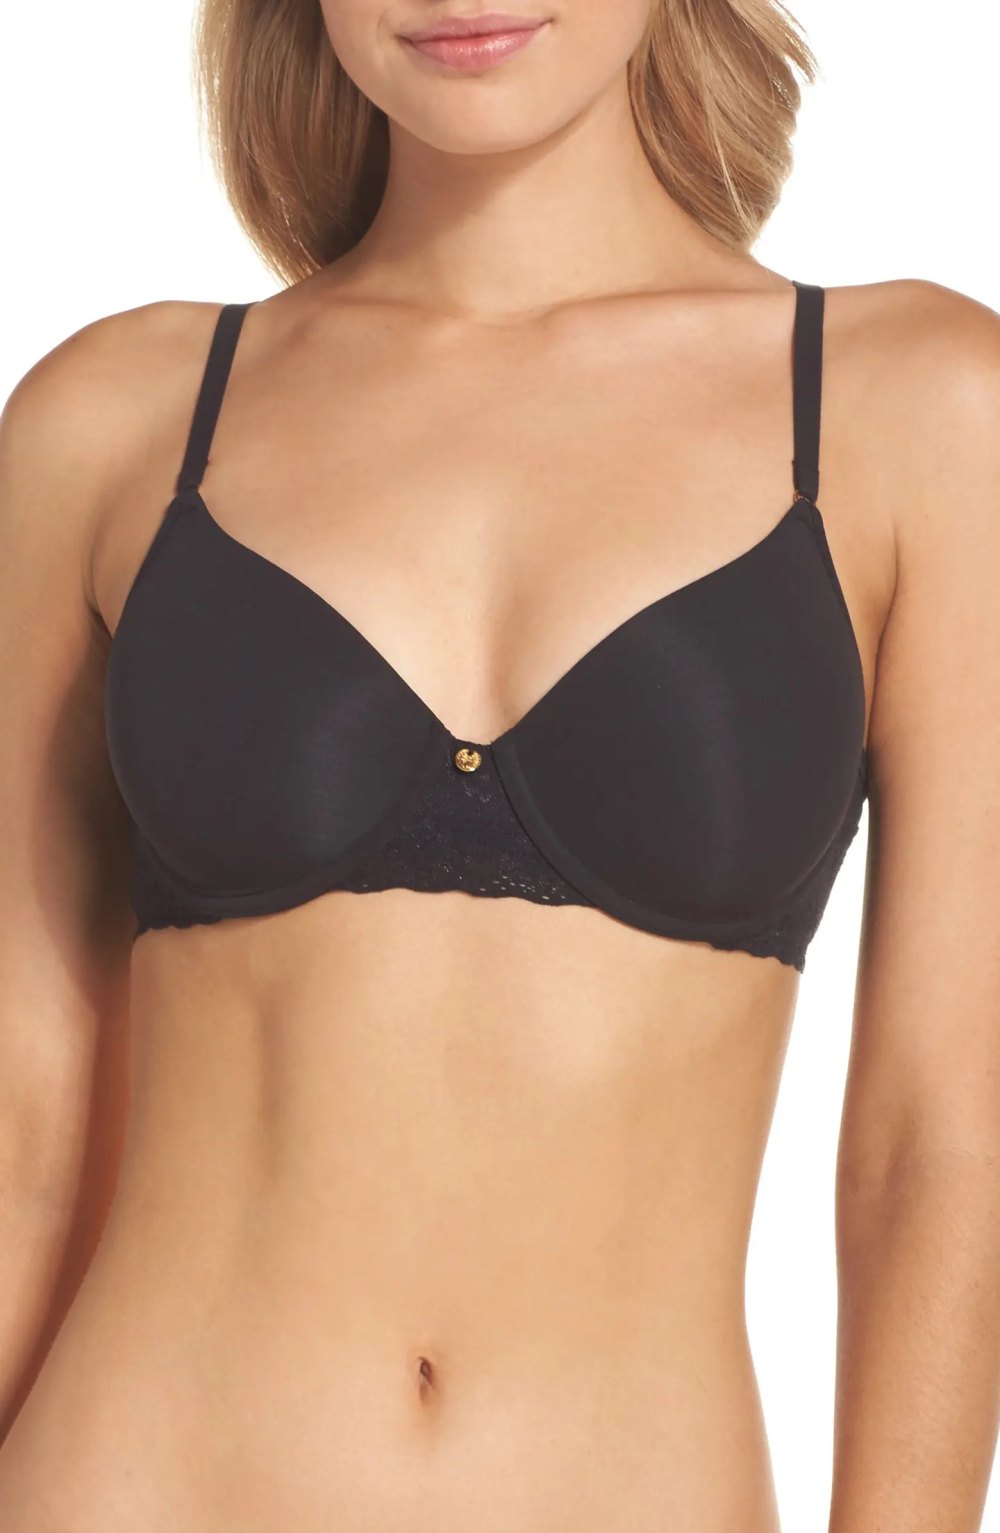 15 Best Summer Bras to Support Large Busts